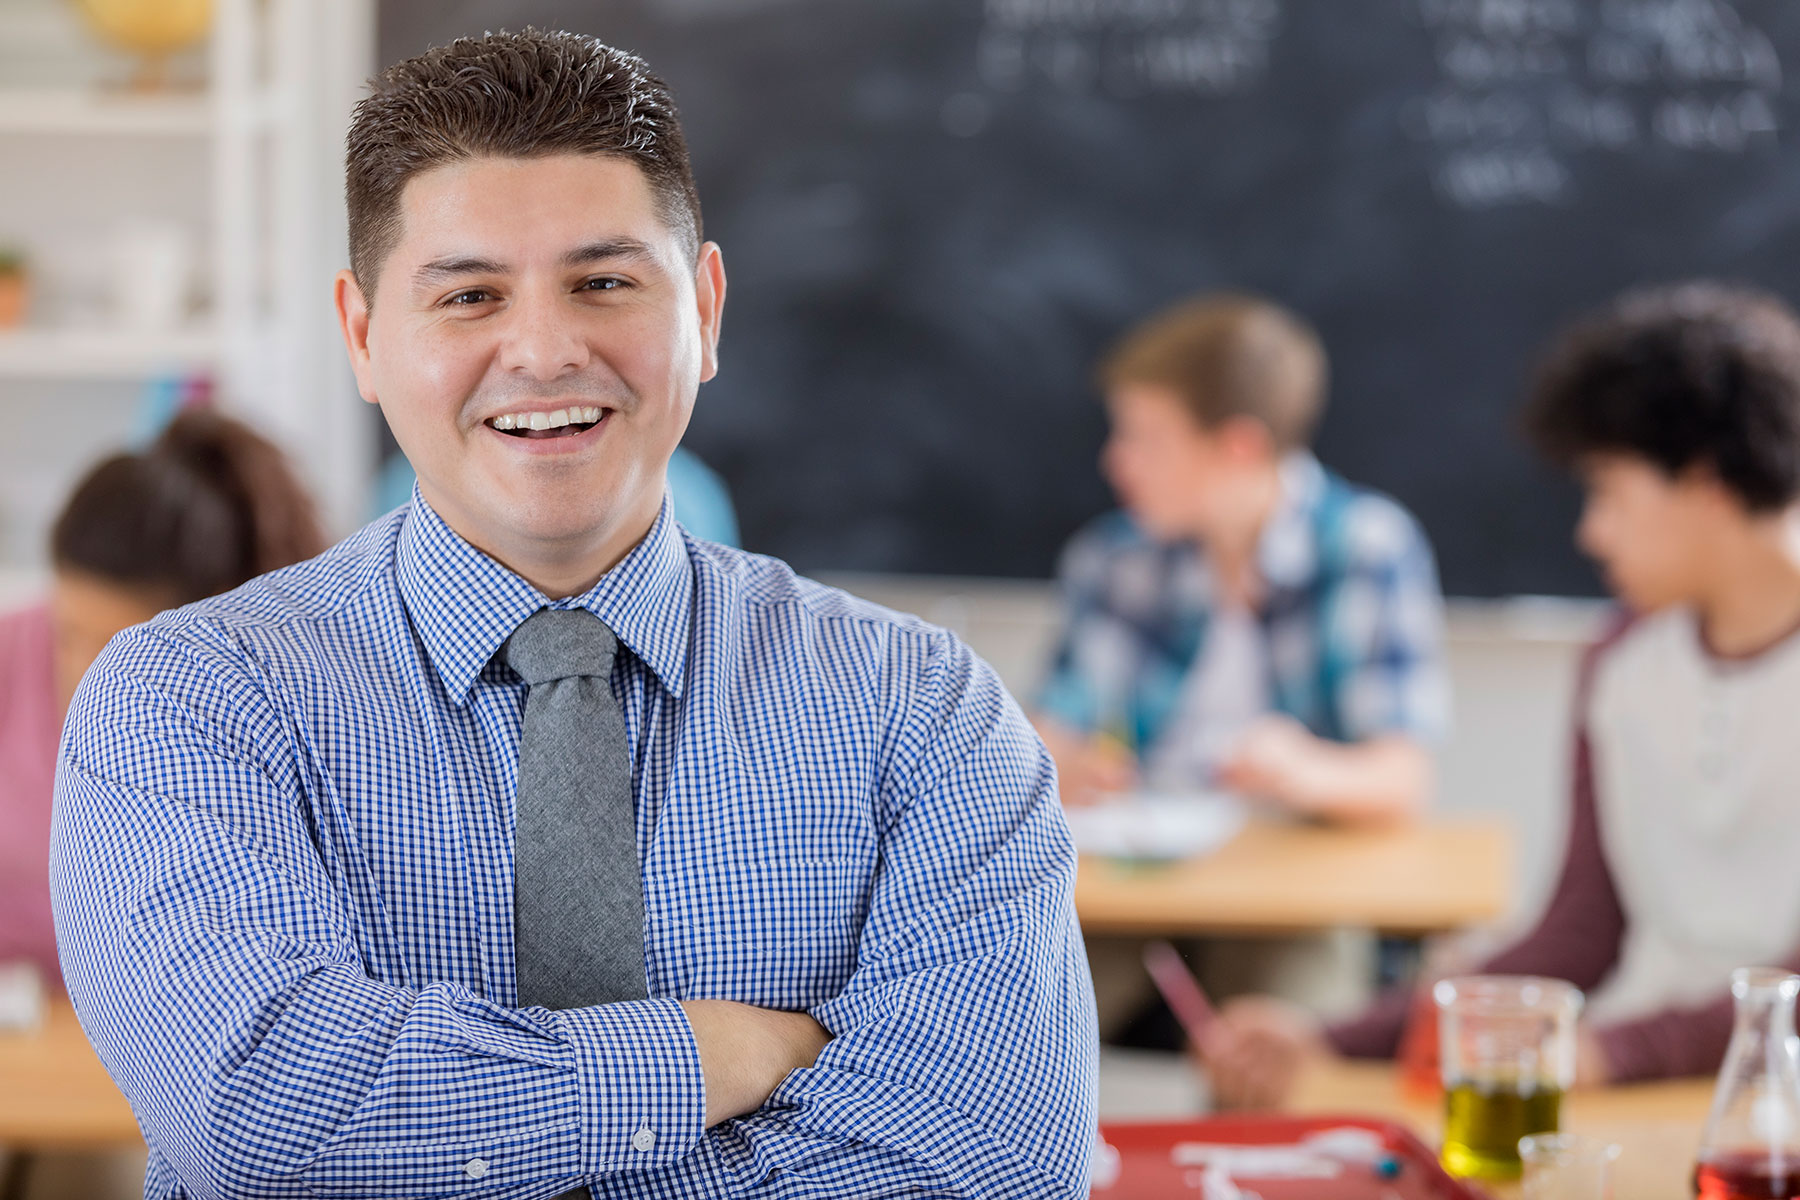 teacher smiling, standing in front of classroom